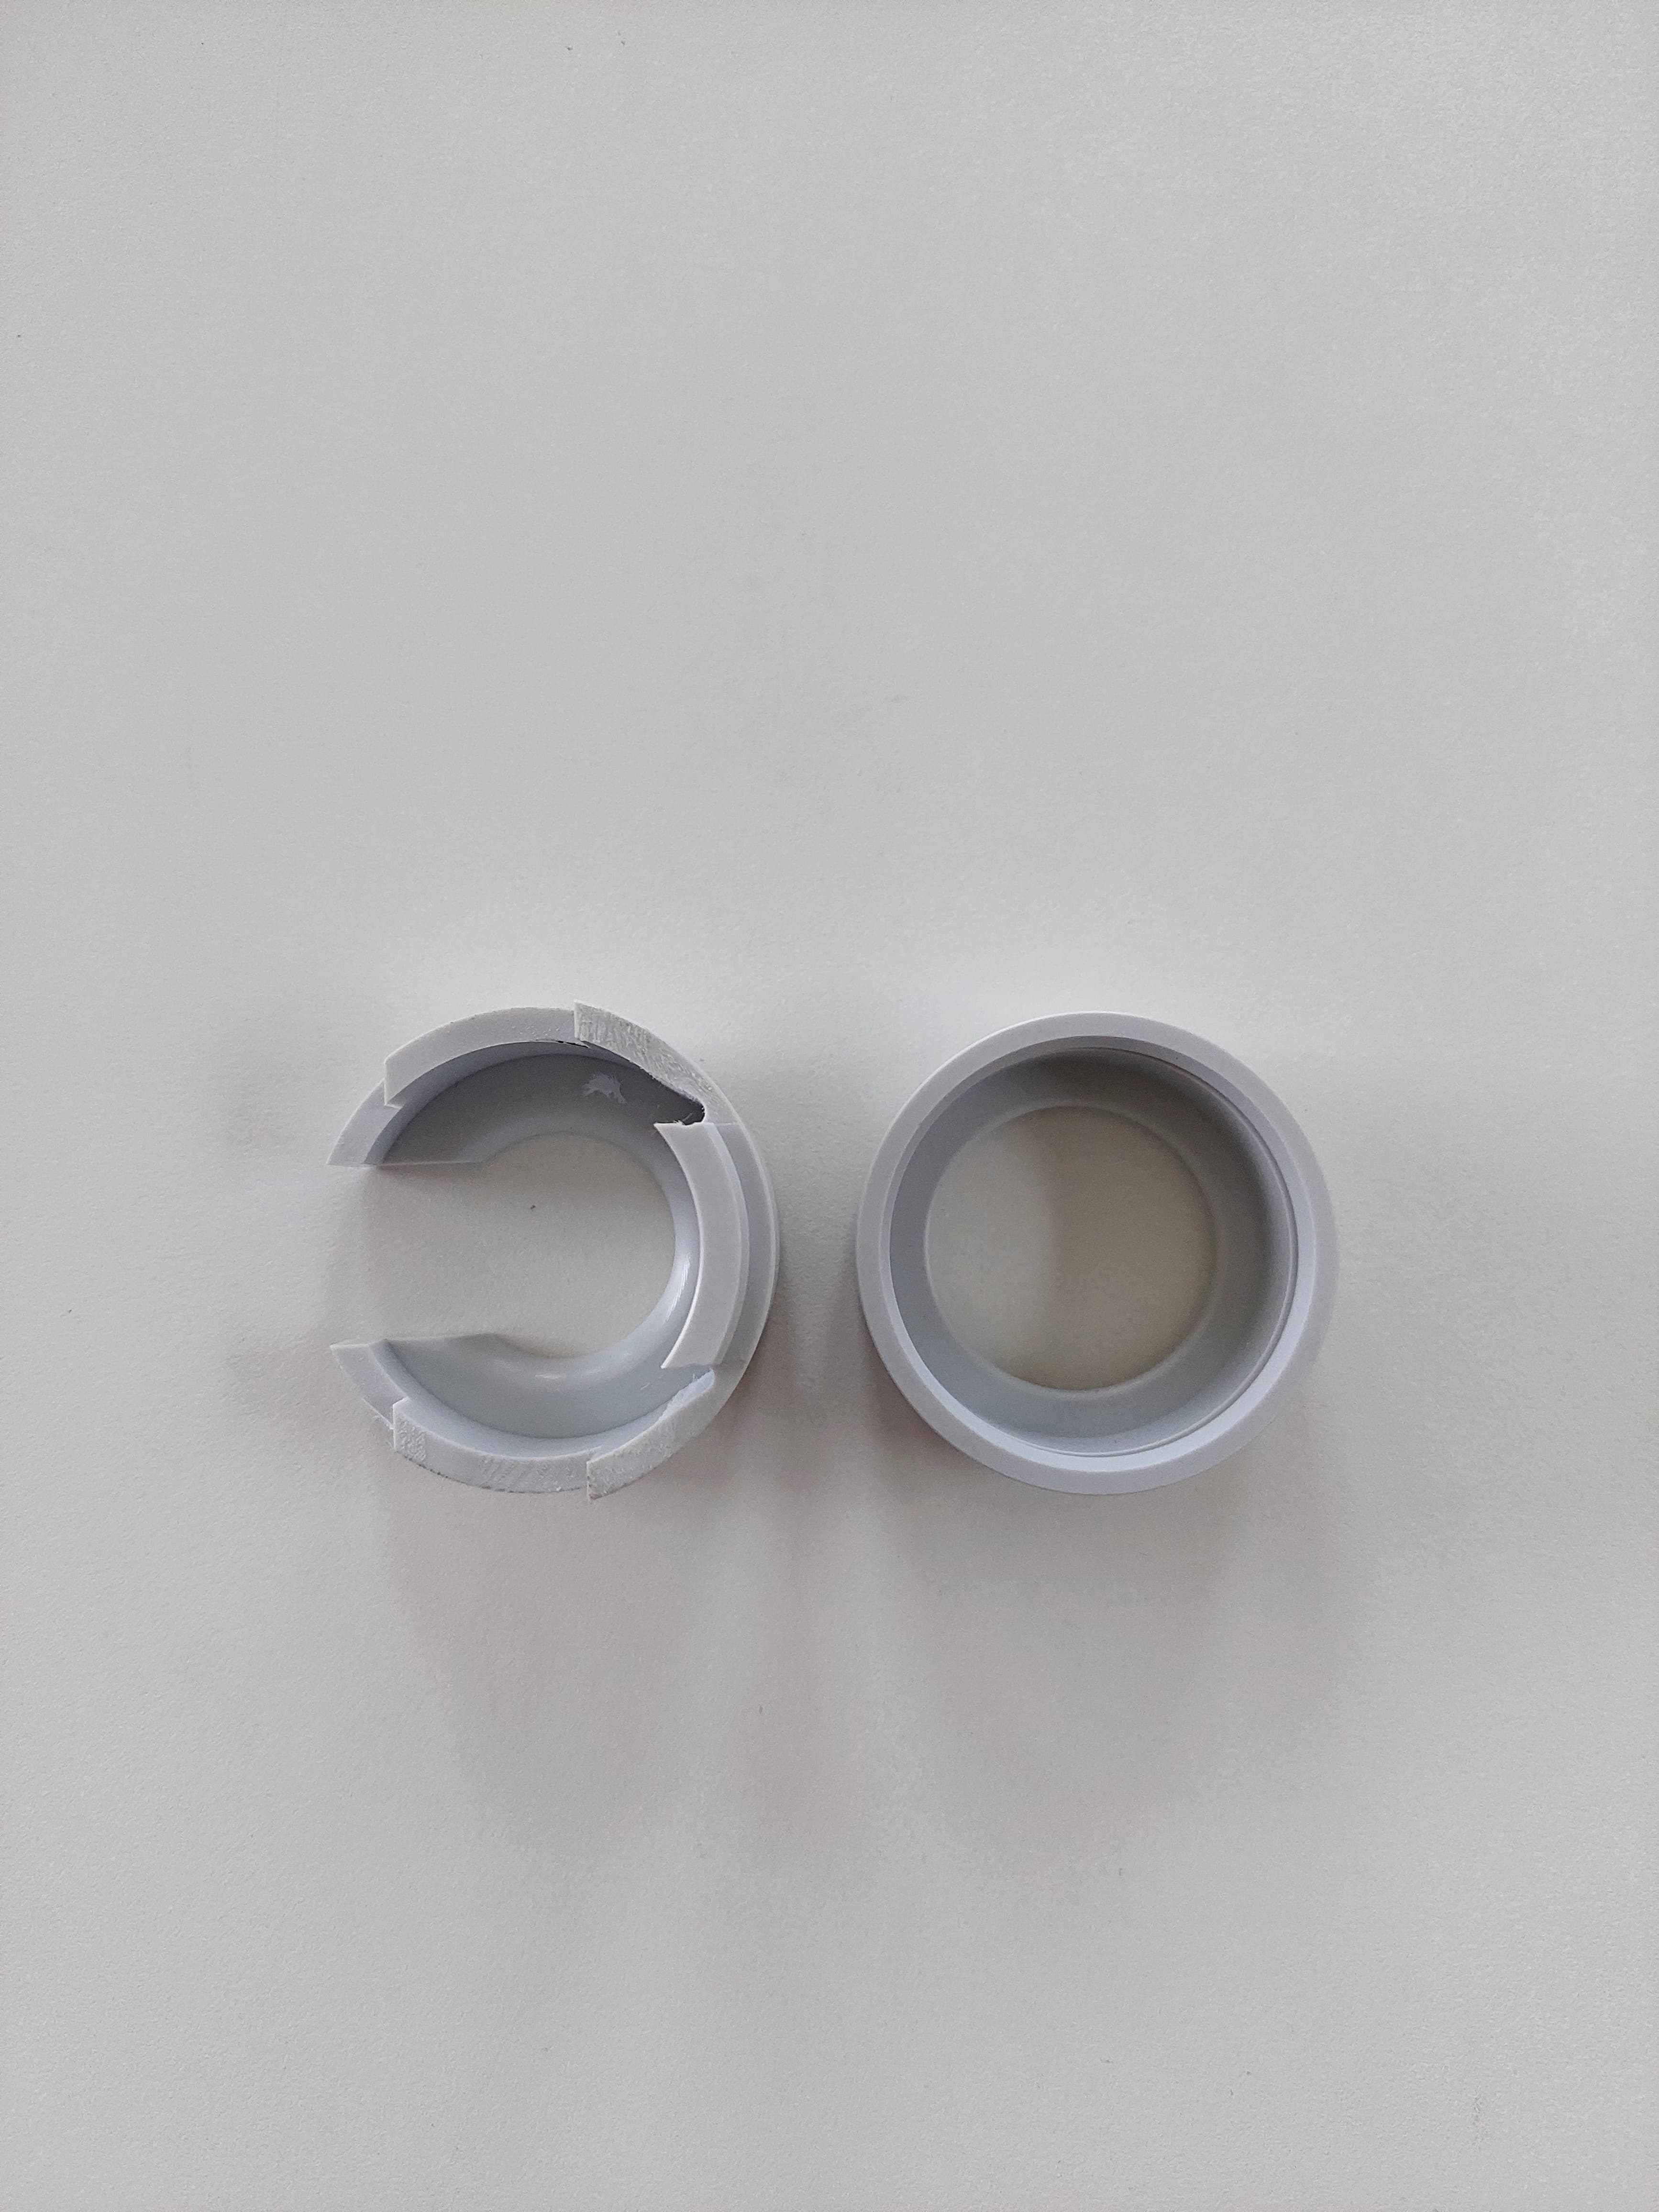 Closed ring for suction hoses